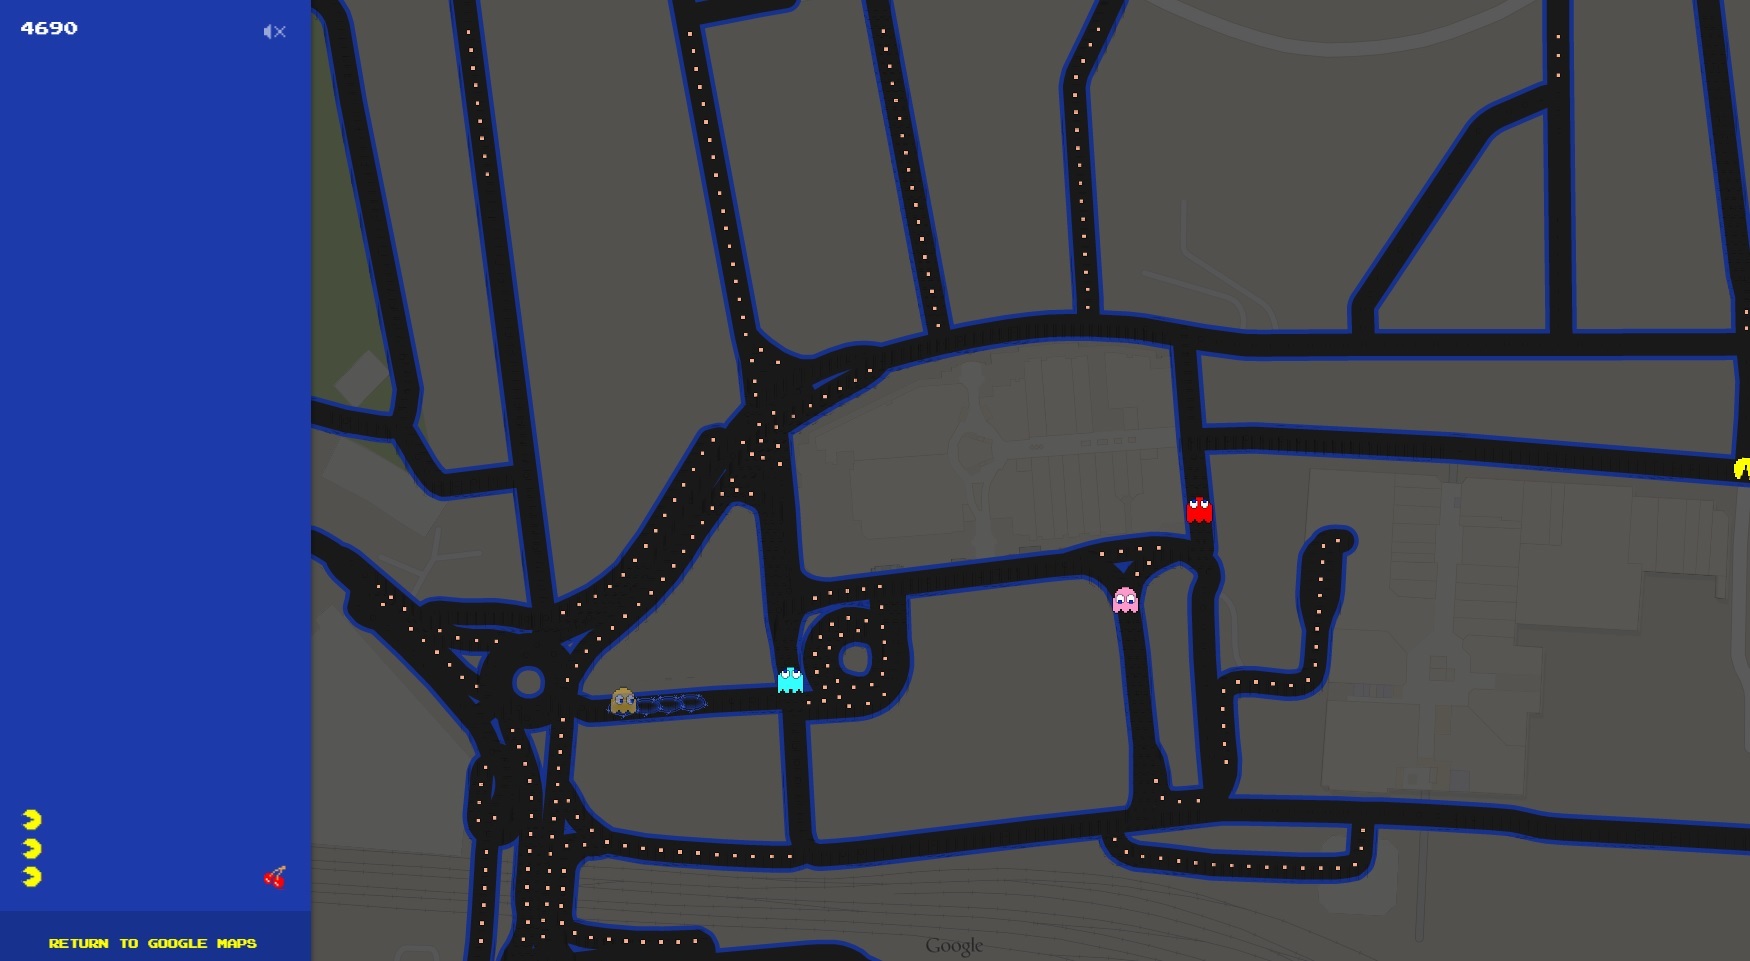 Google Maps allows you to play PacMan On Your Street